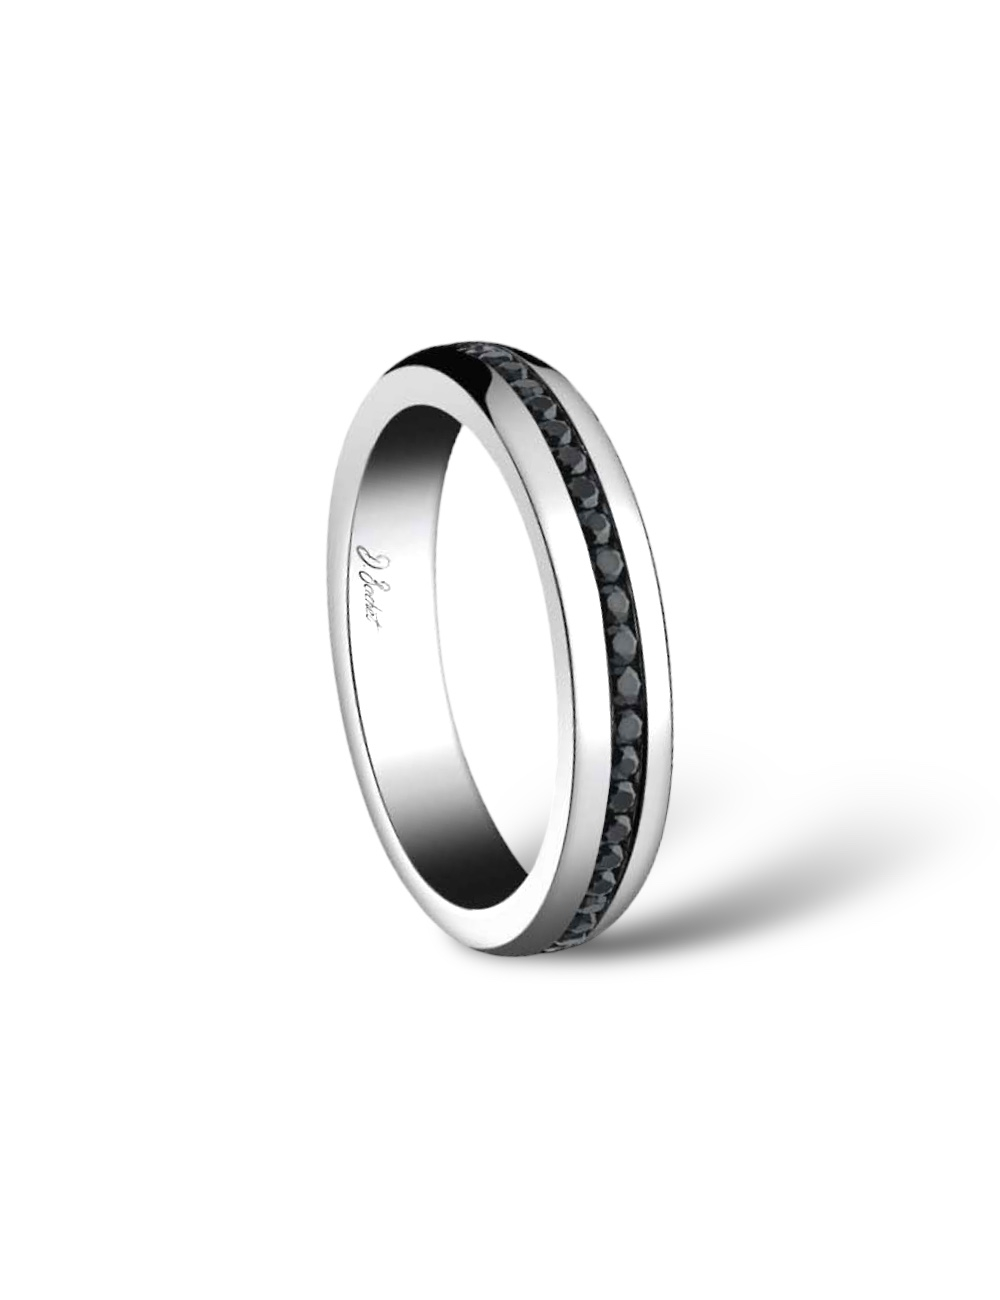 Traditional and creative men's wedding ring in platinum with set black diamonds, made in France.